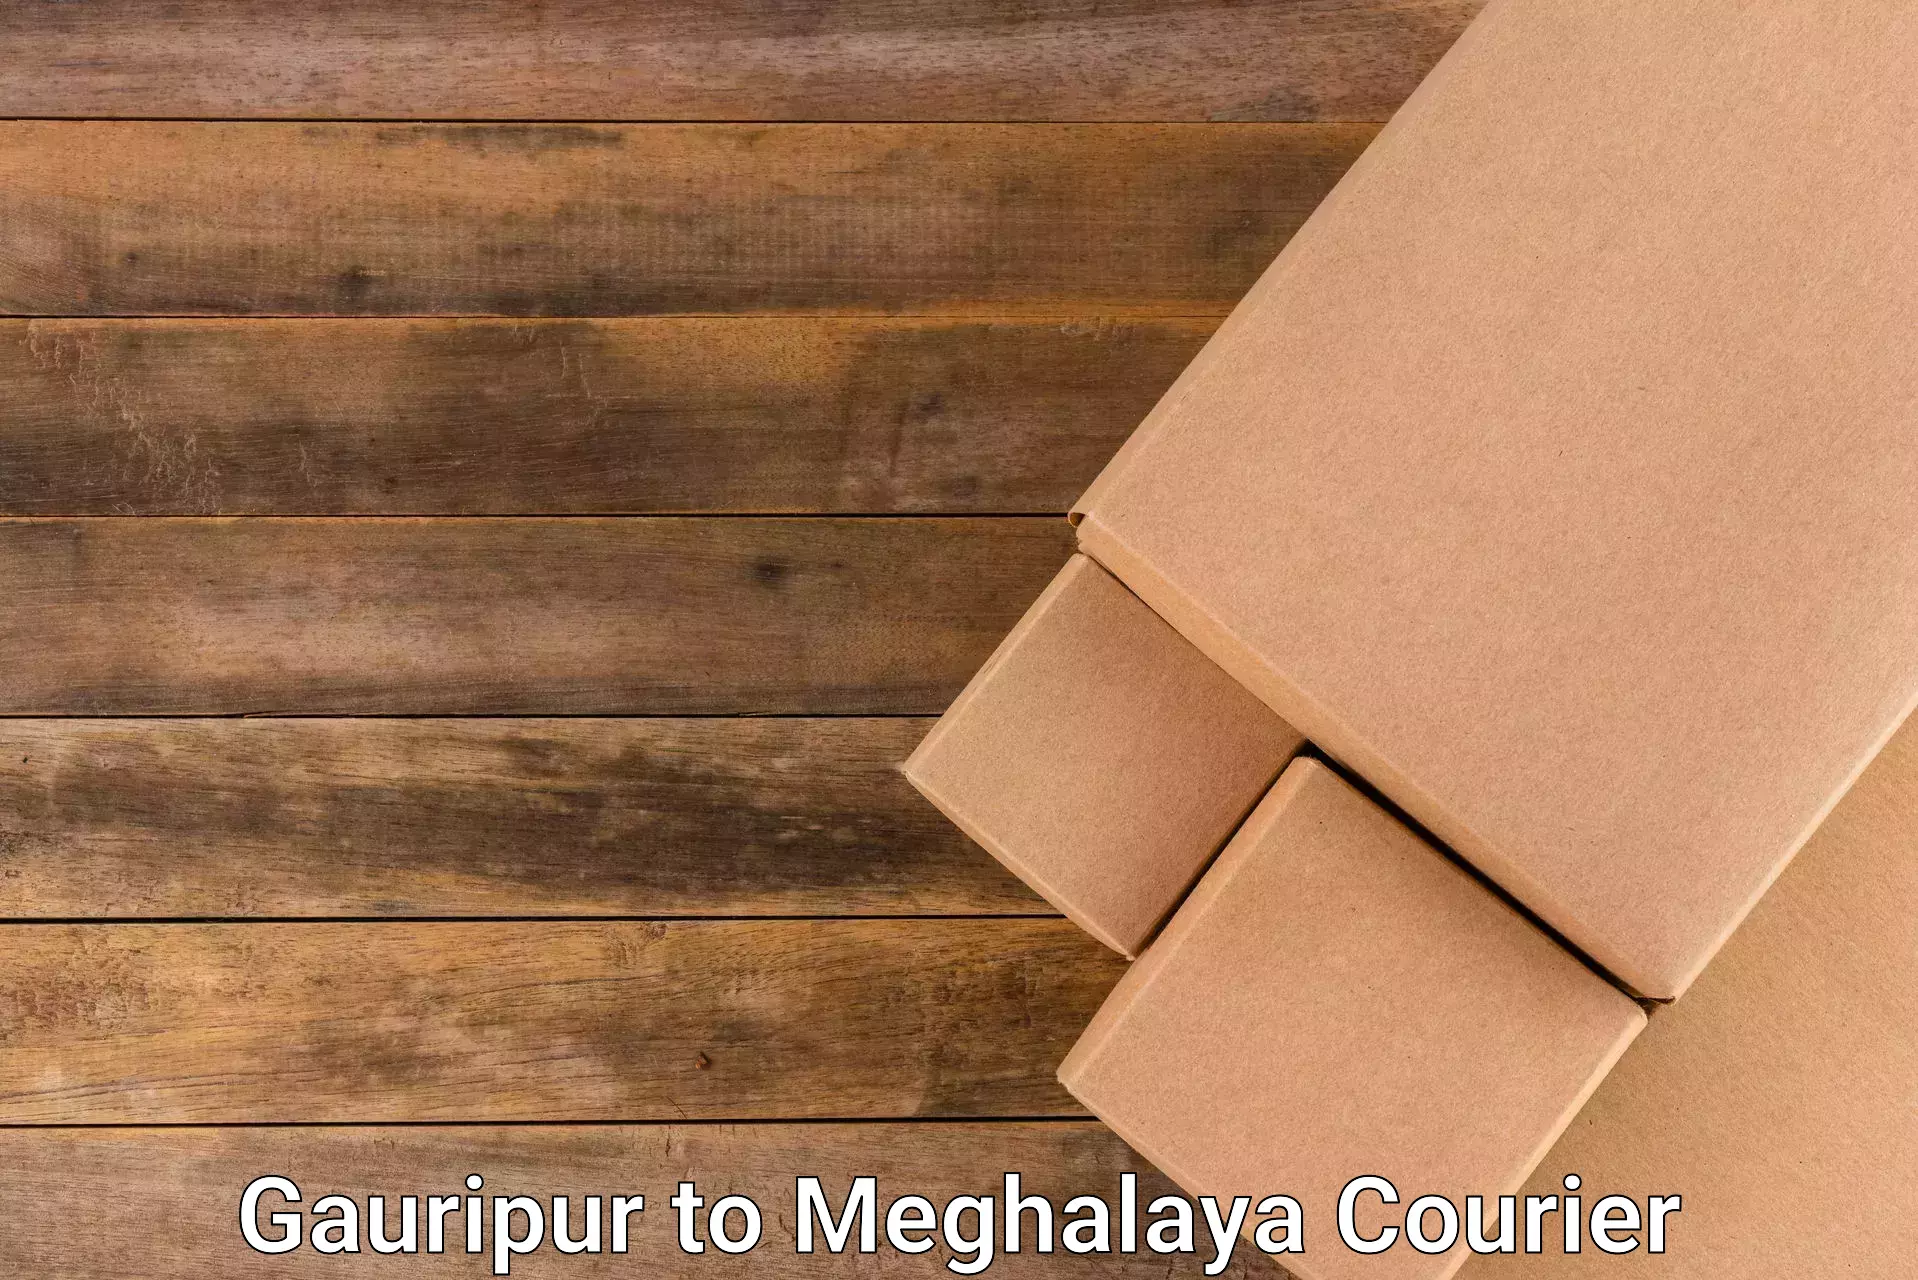 Next-day delivery options Gauripur to Meghalaya